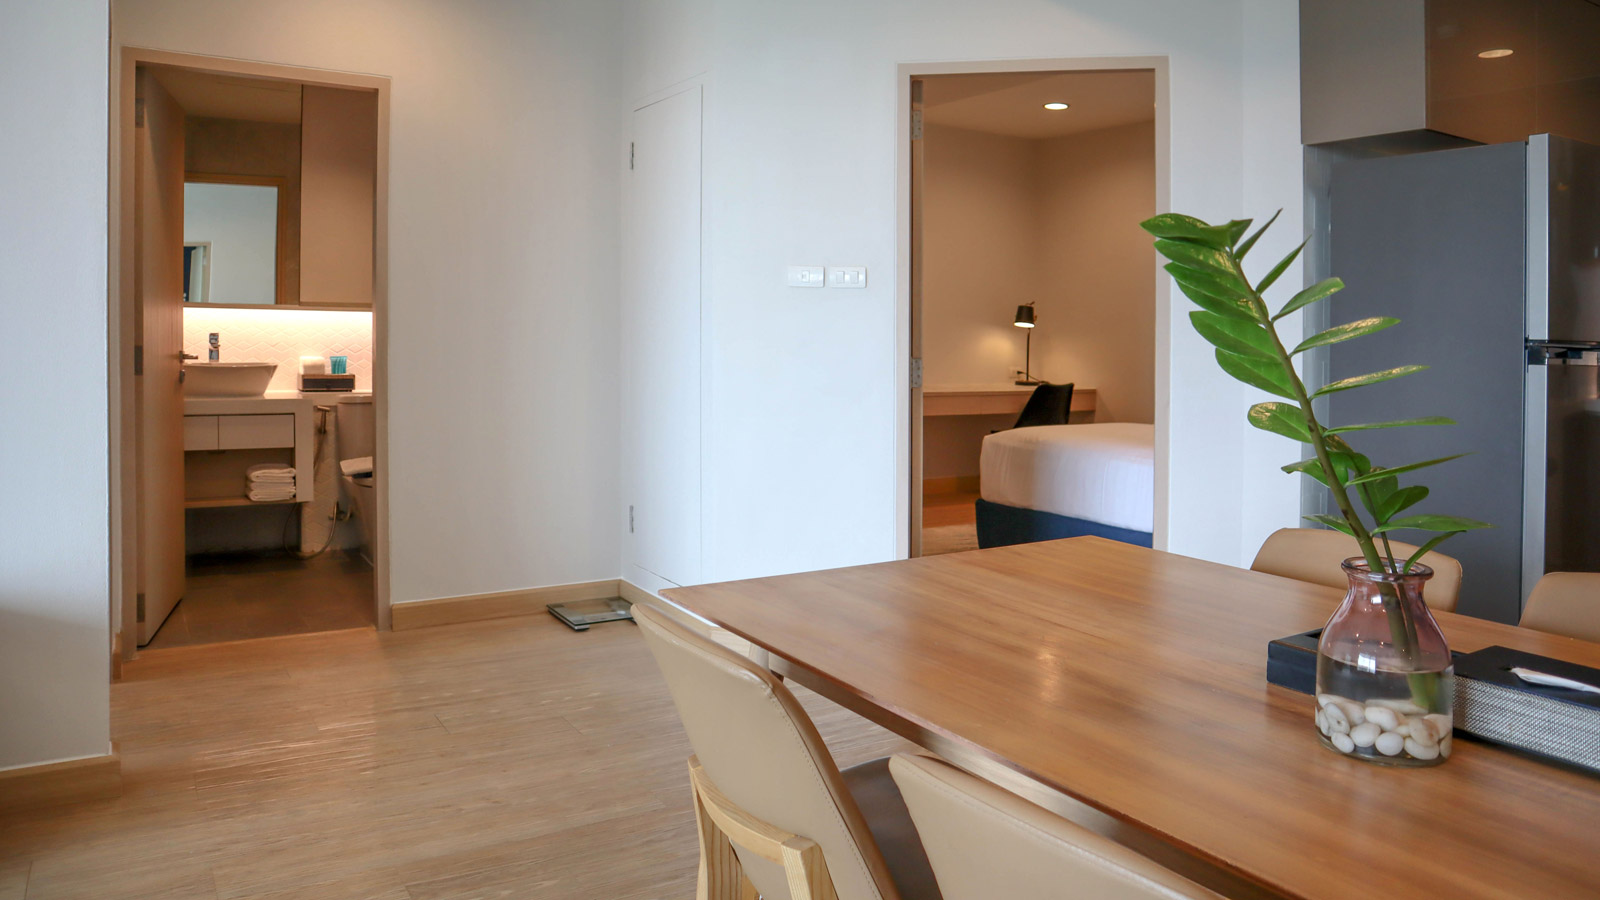 Three Bedroom Lakeview - Dining area - 샤마 레이크뷰 아속 방콕